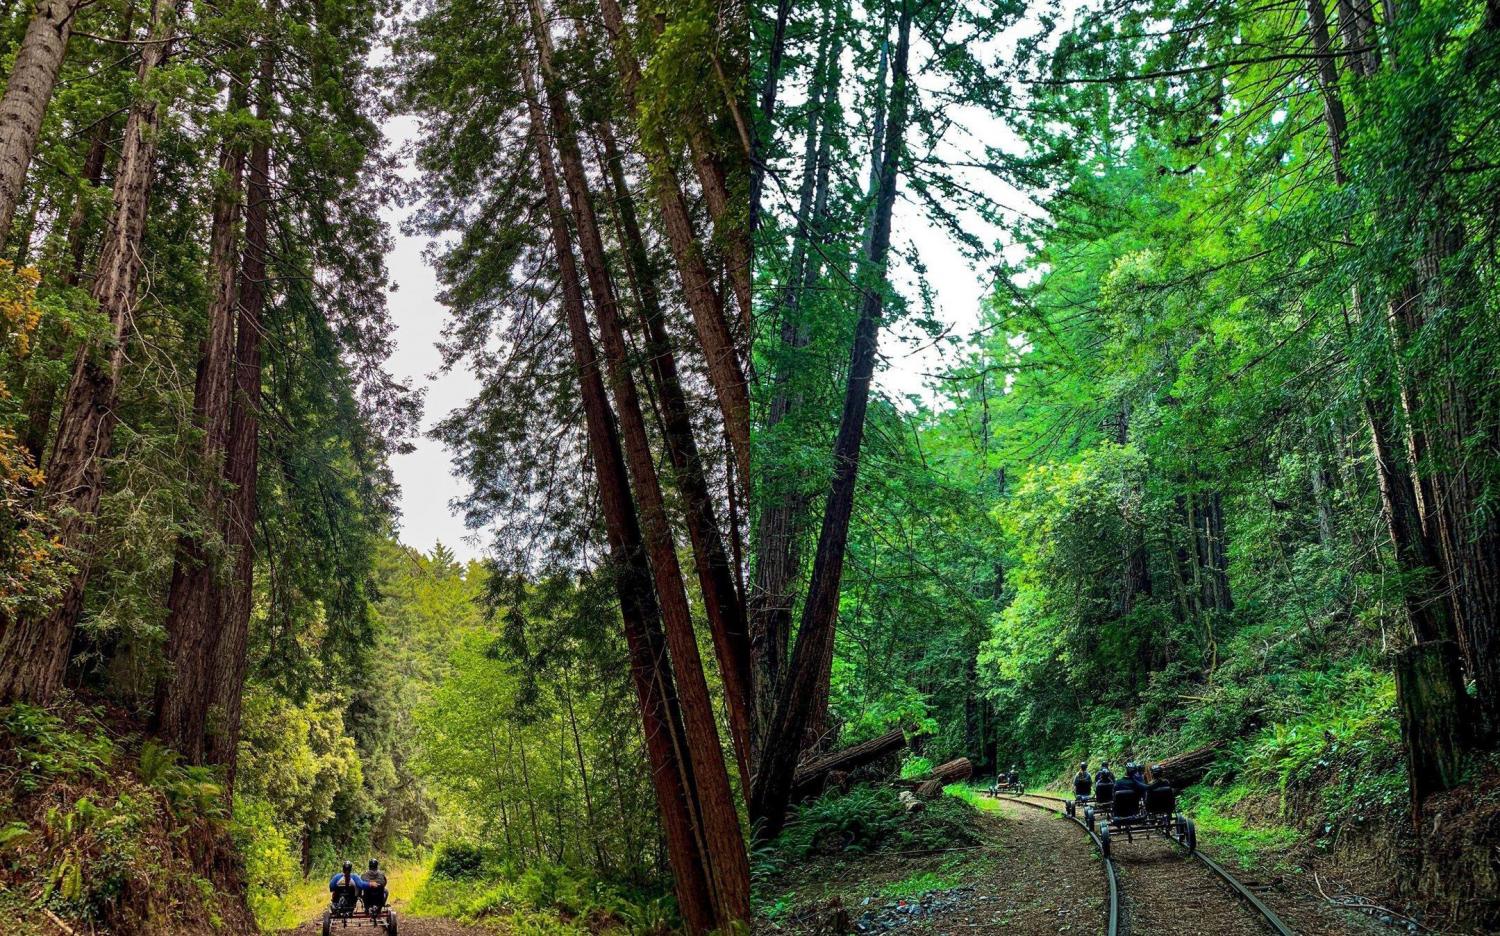 Rail Bikes Let You Pedal Through The Redwood Forest In California - Electric Railroad bicycles tour redwoods